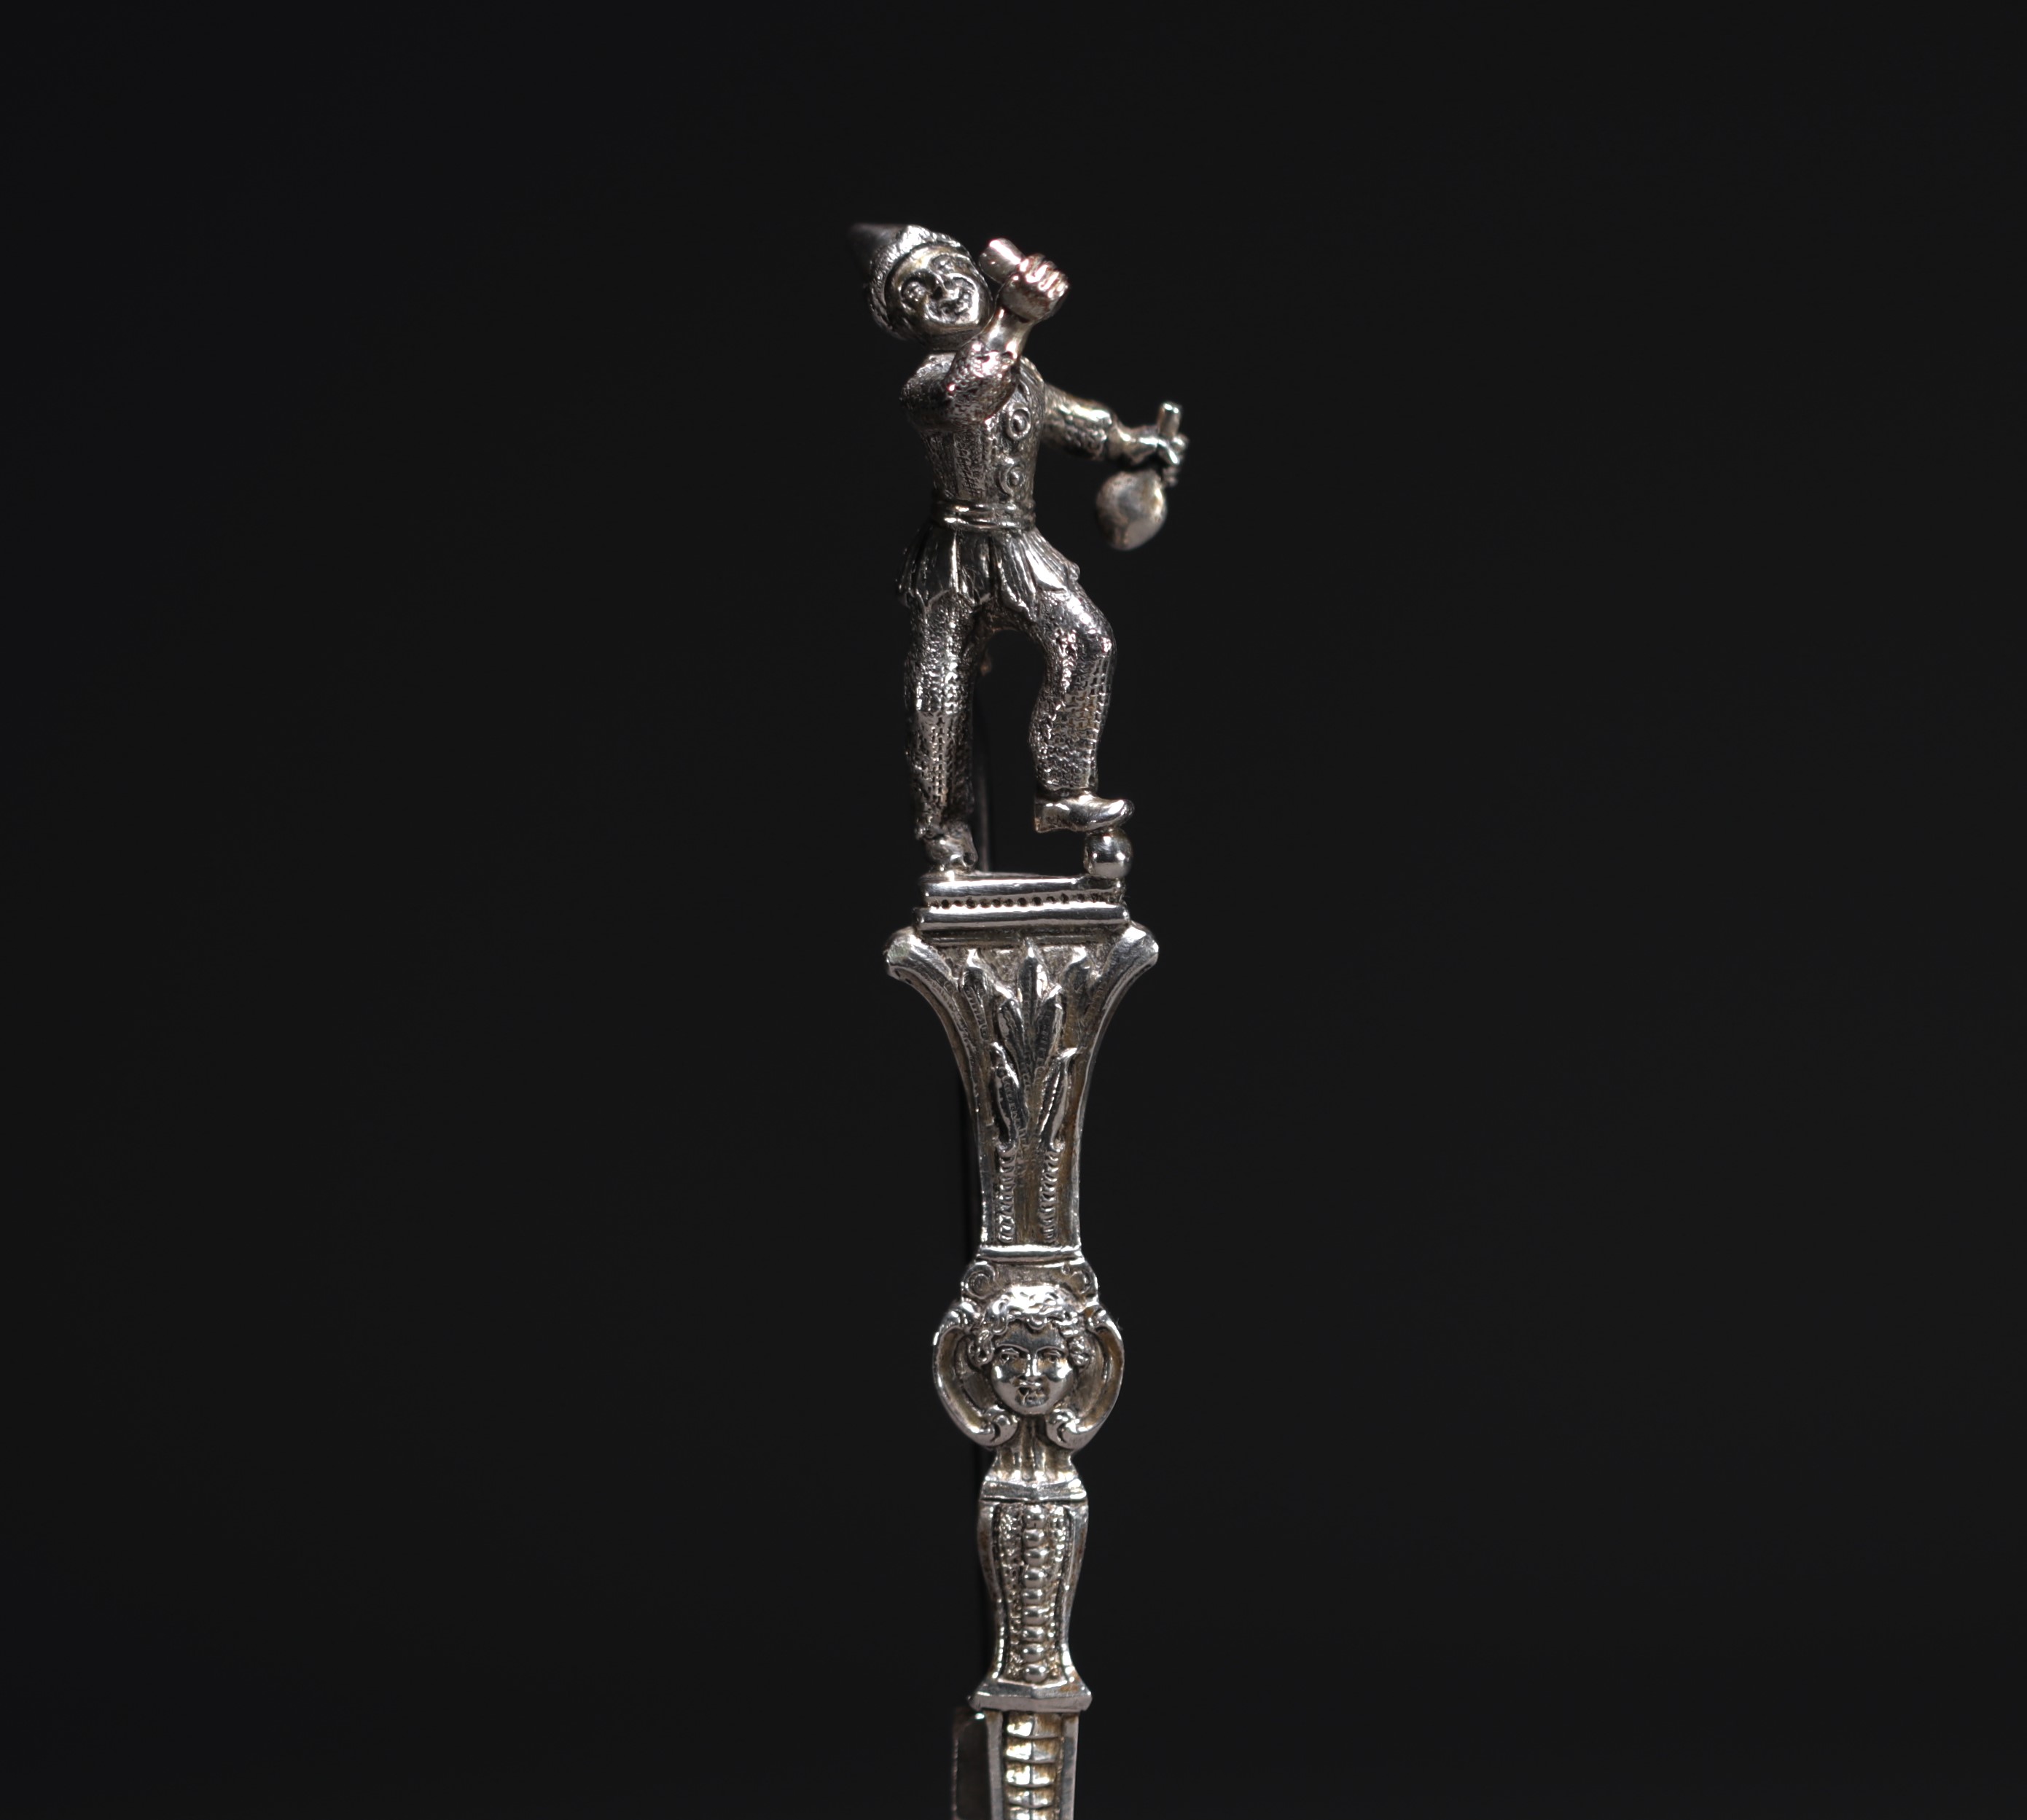 Solid silver ragout spoon surmounted by a pitre, court entertainer, 18th century. - Image 2 of 2